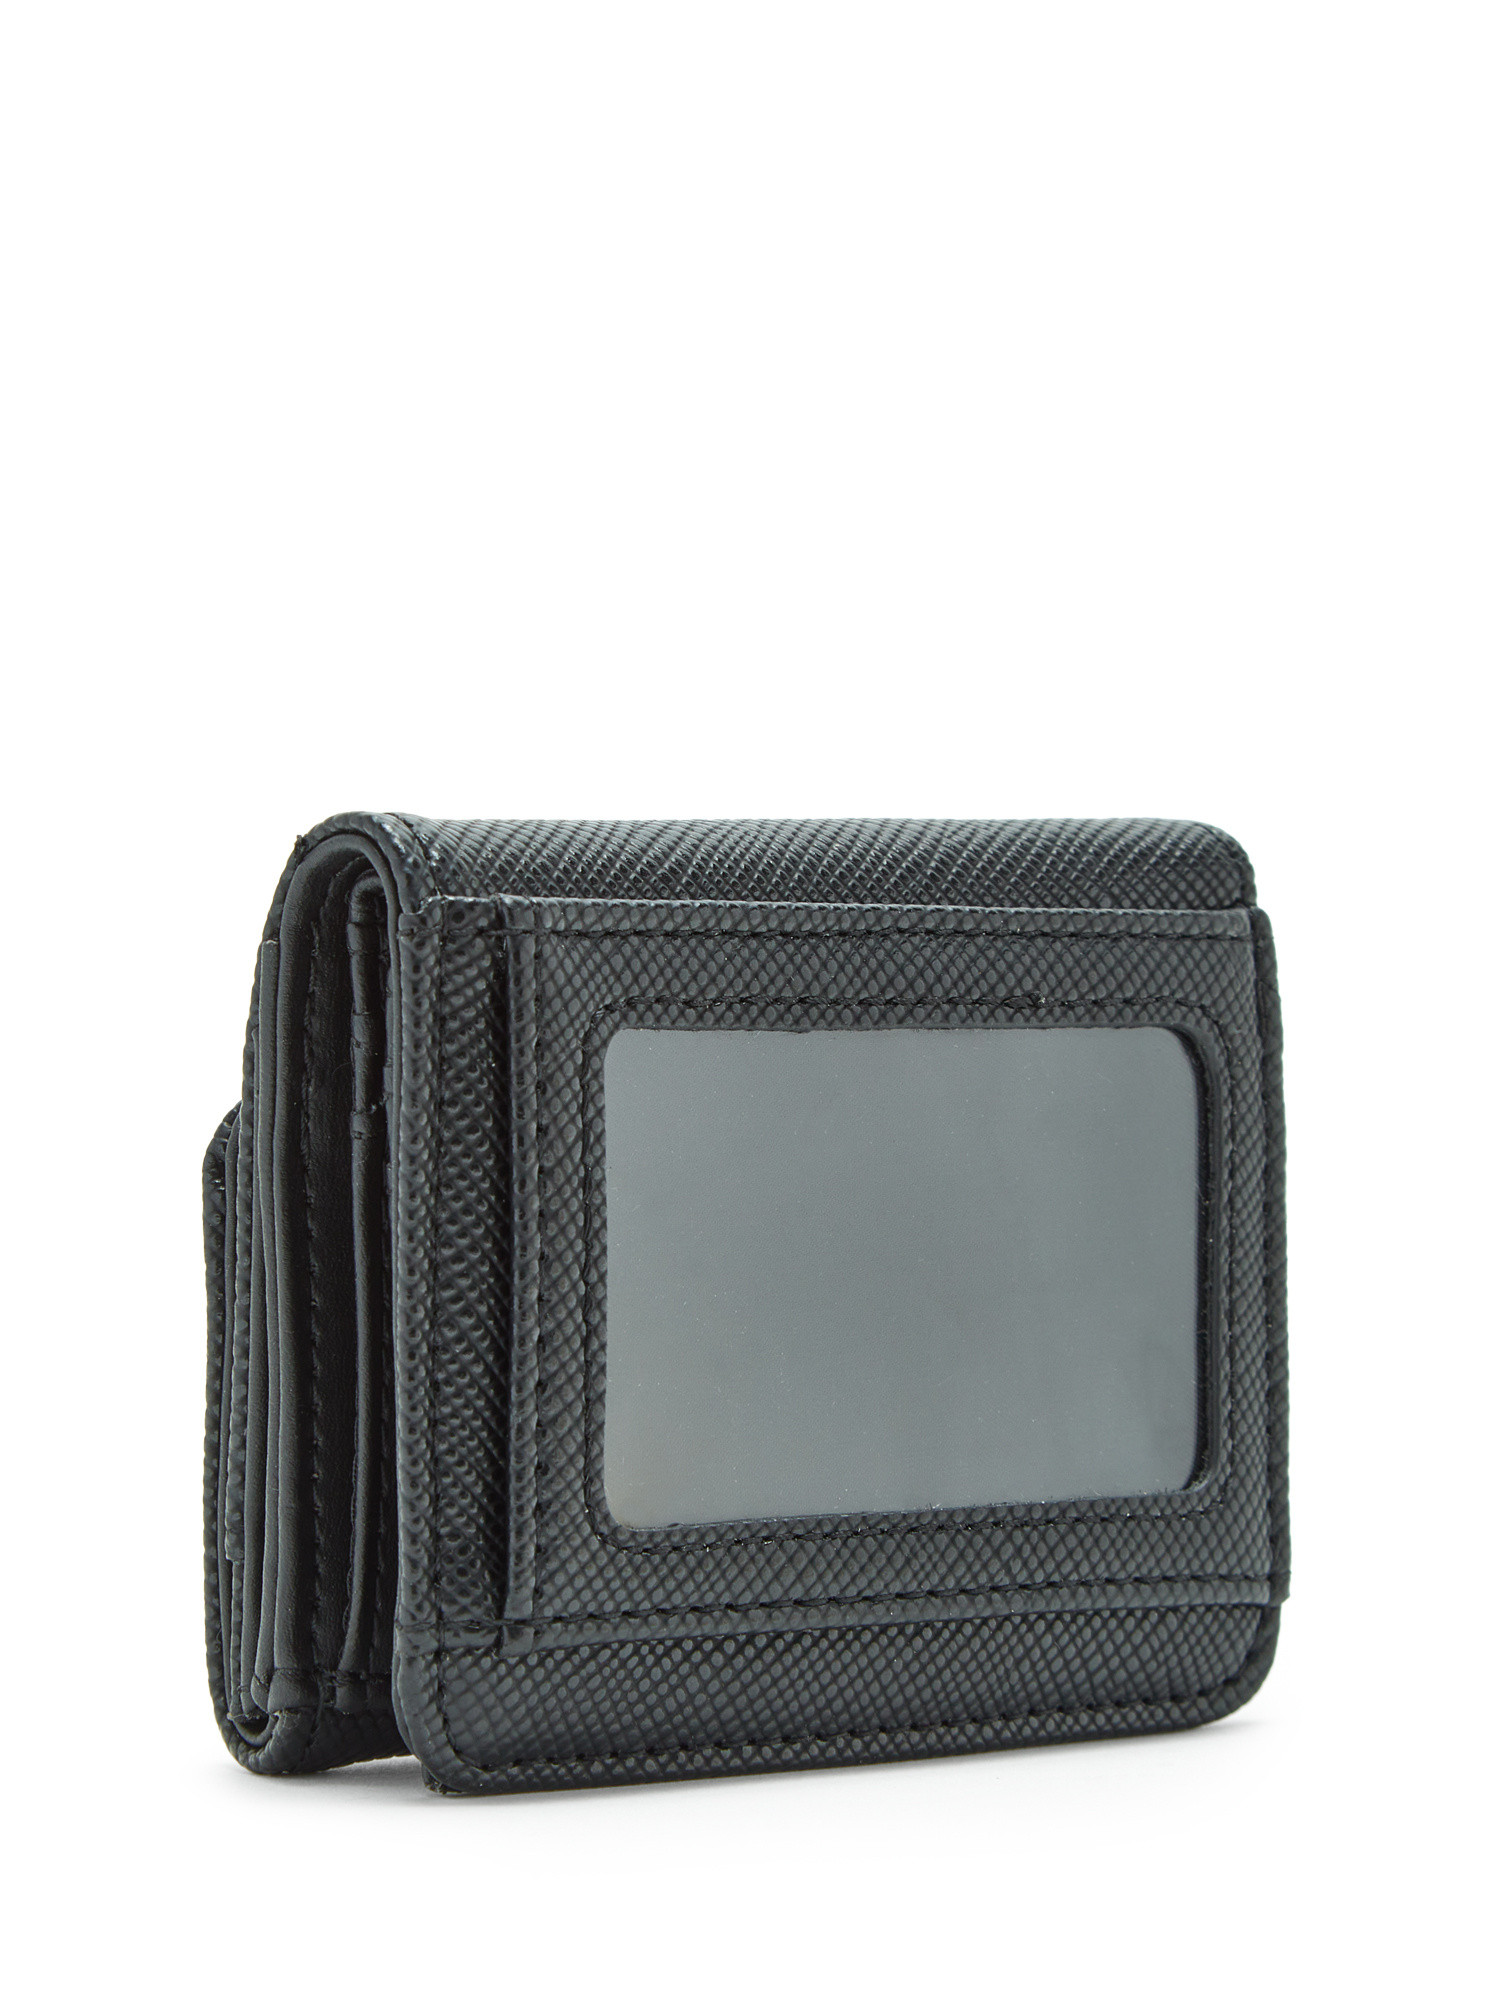 Guess - Wallet with logo, Black, large image number 1